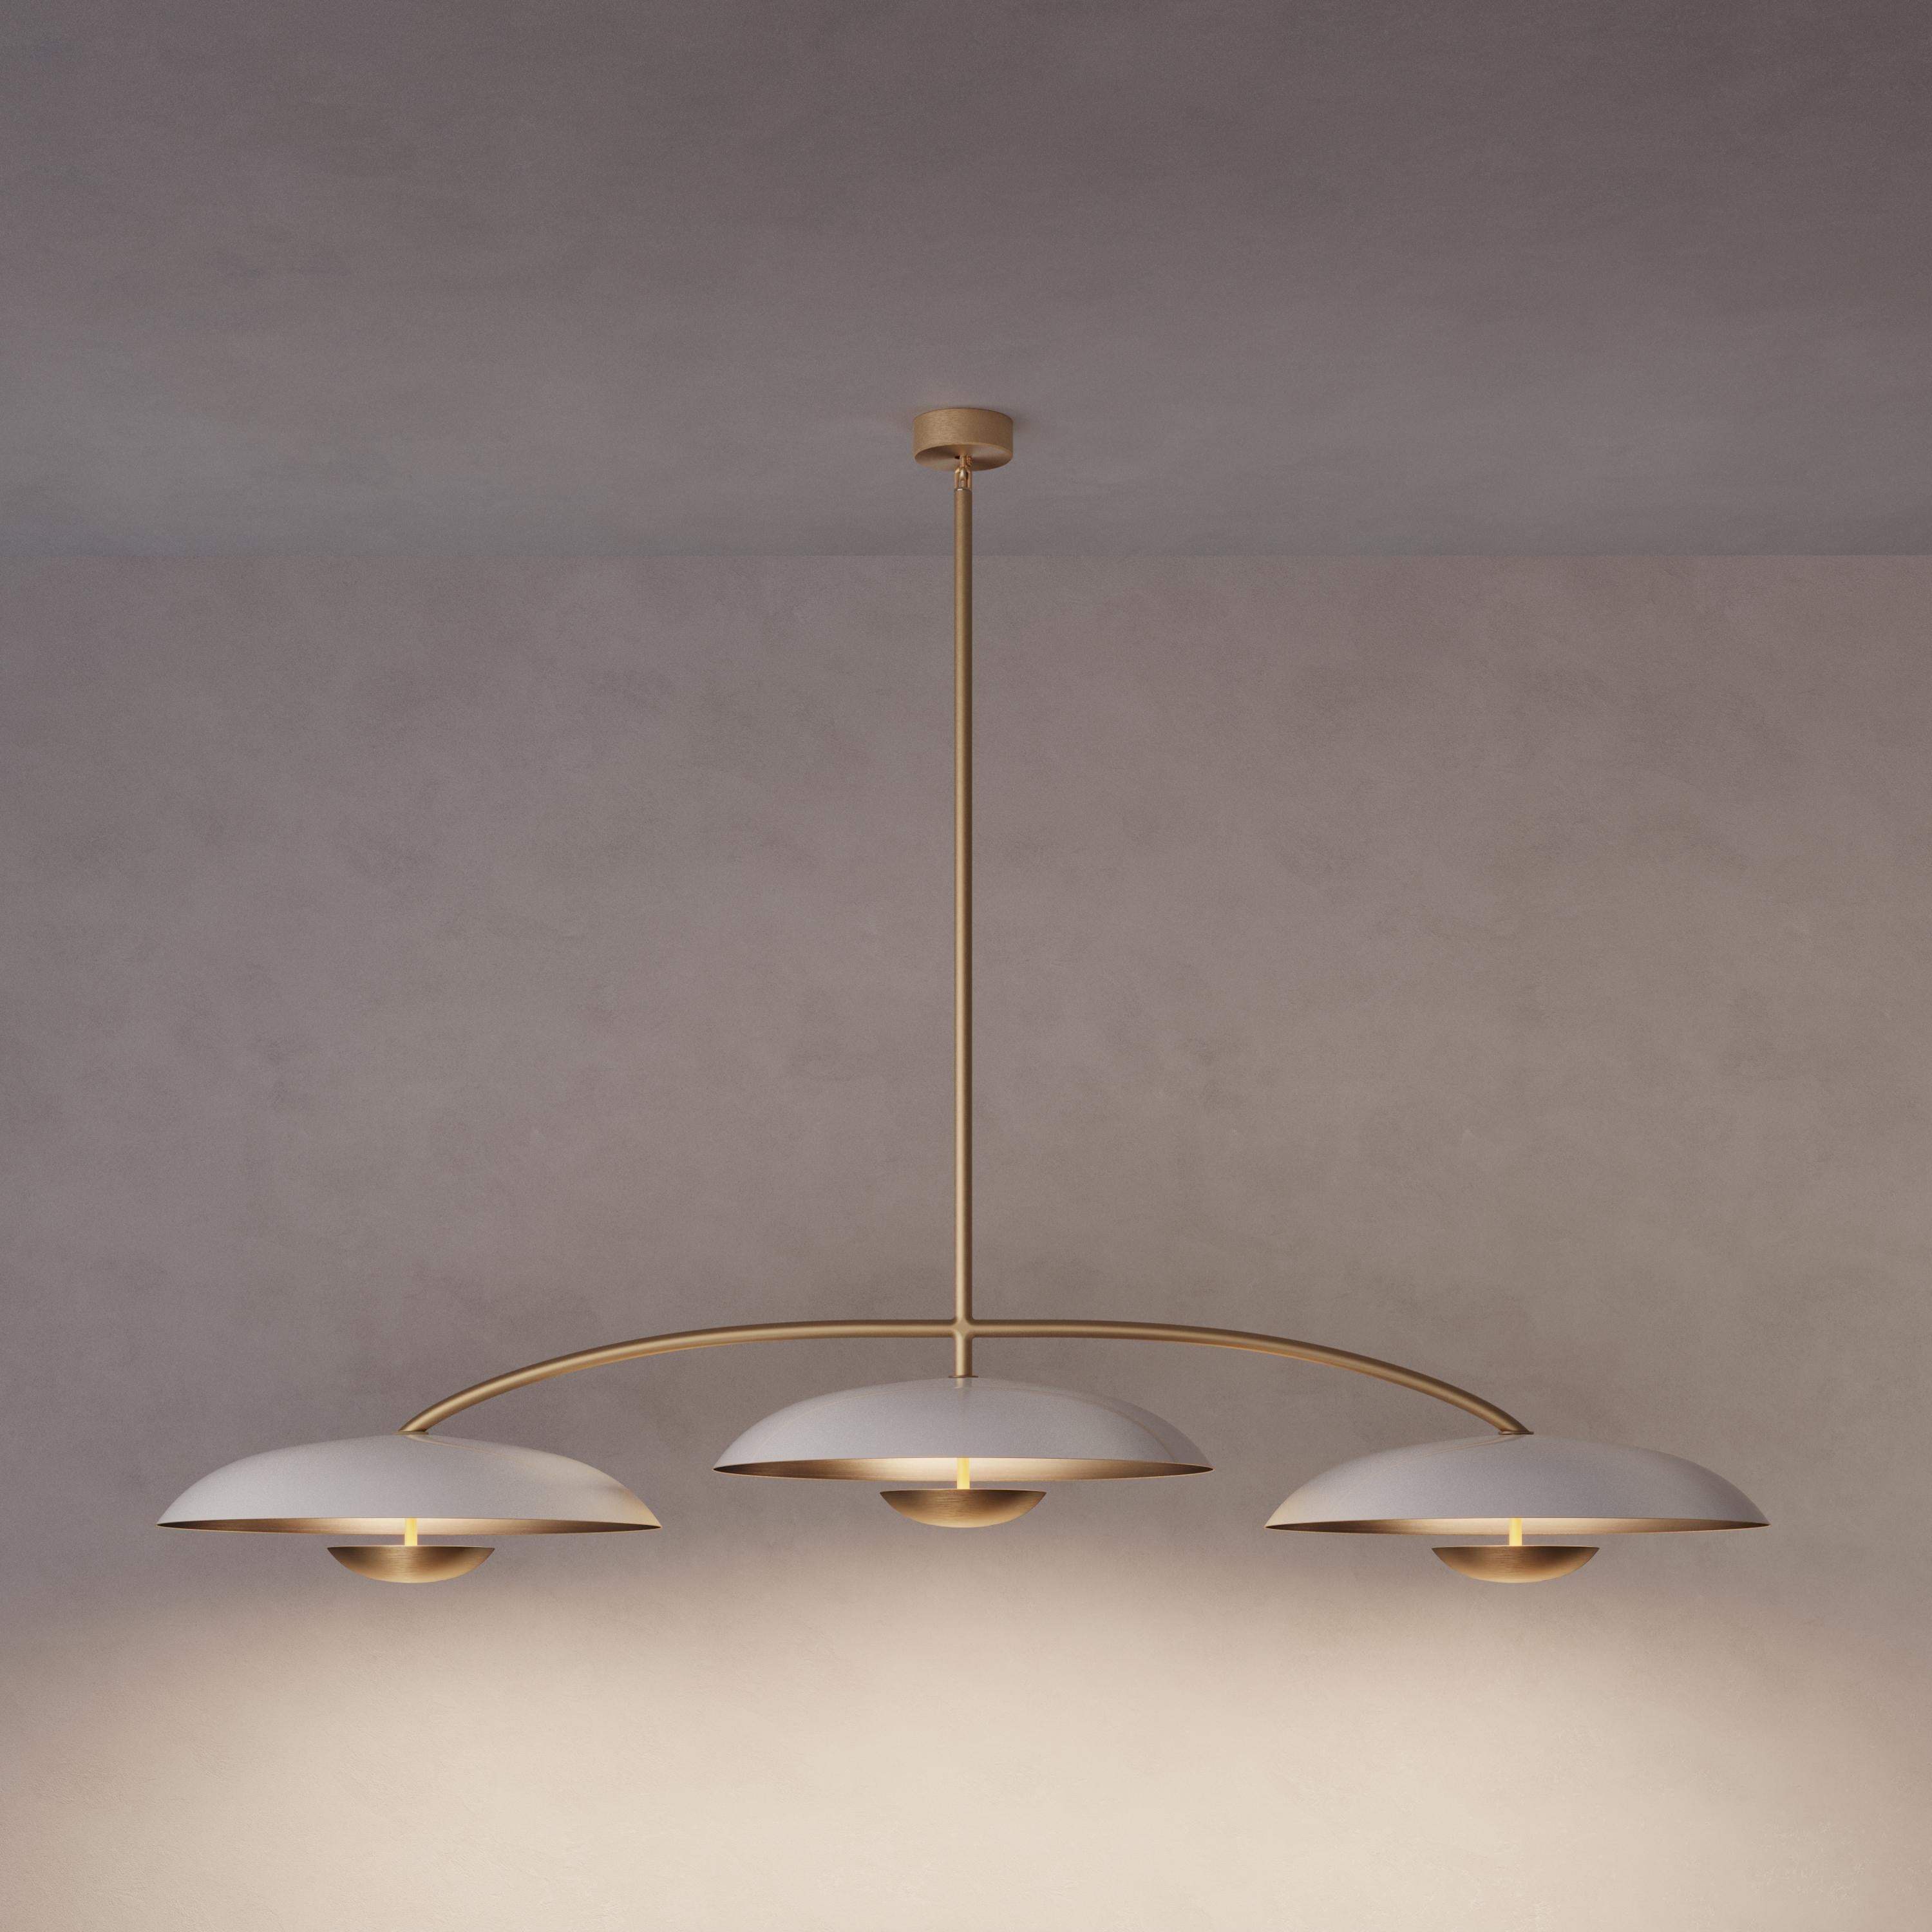 Trio for three, a unique ceiling light composed by a cluster of lighting components. Combining patinated brass plates and finely brushed brass framework, the Orbit Trio ceiling light is softly illuminated with LED elements from within.
 
This